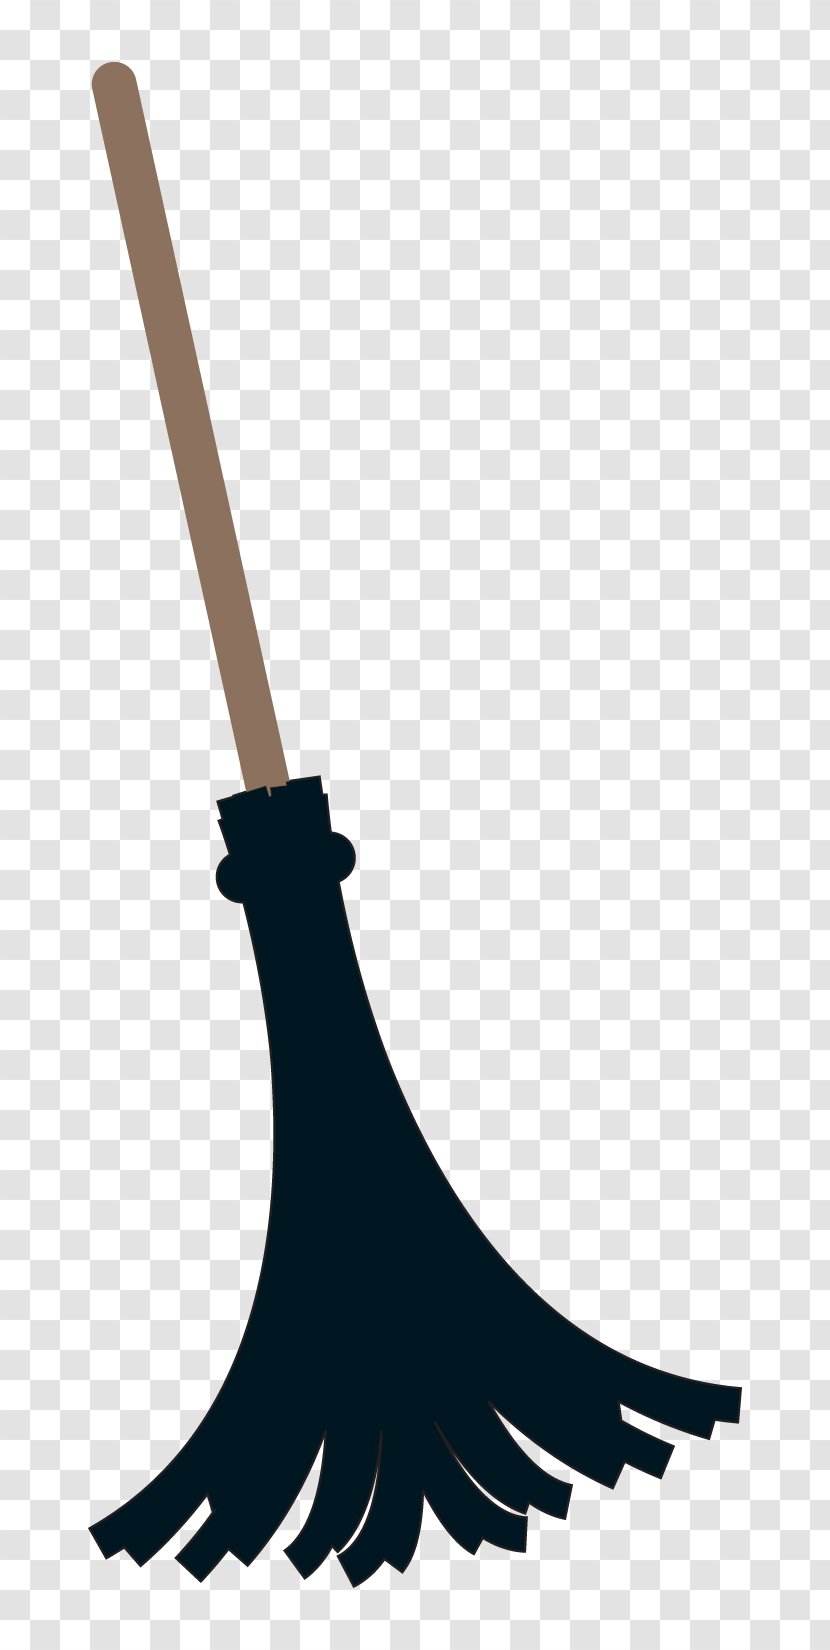 Clip Art Openclipart Witchcraft Witch's Broom Image Transparent PNG